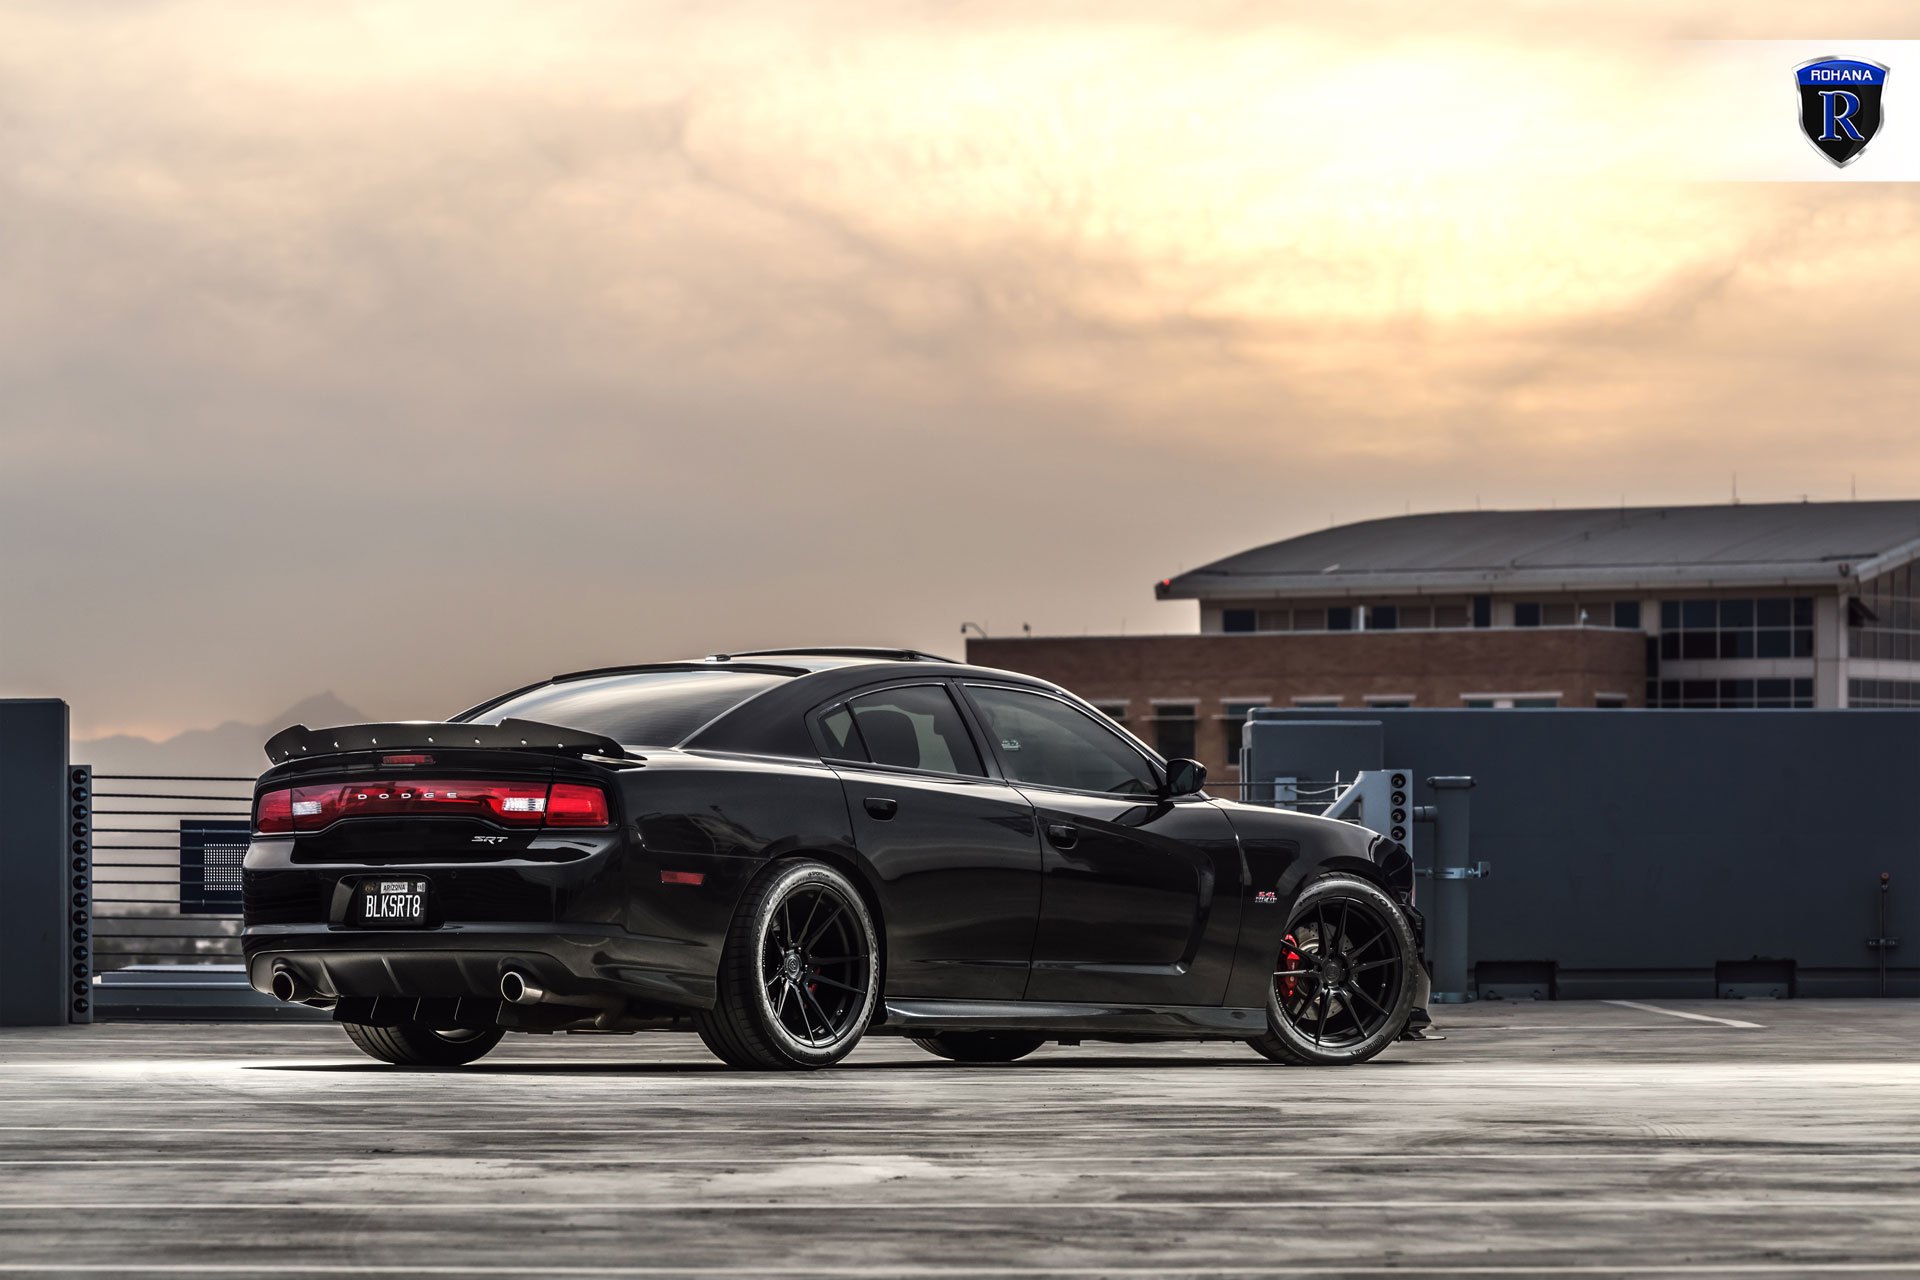 Black Dodge Charger with Custom Style Rear Spoiler - Photo by Rohana Wheels